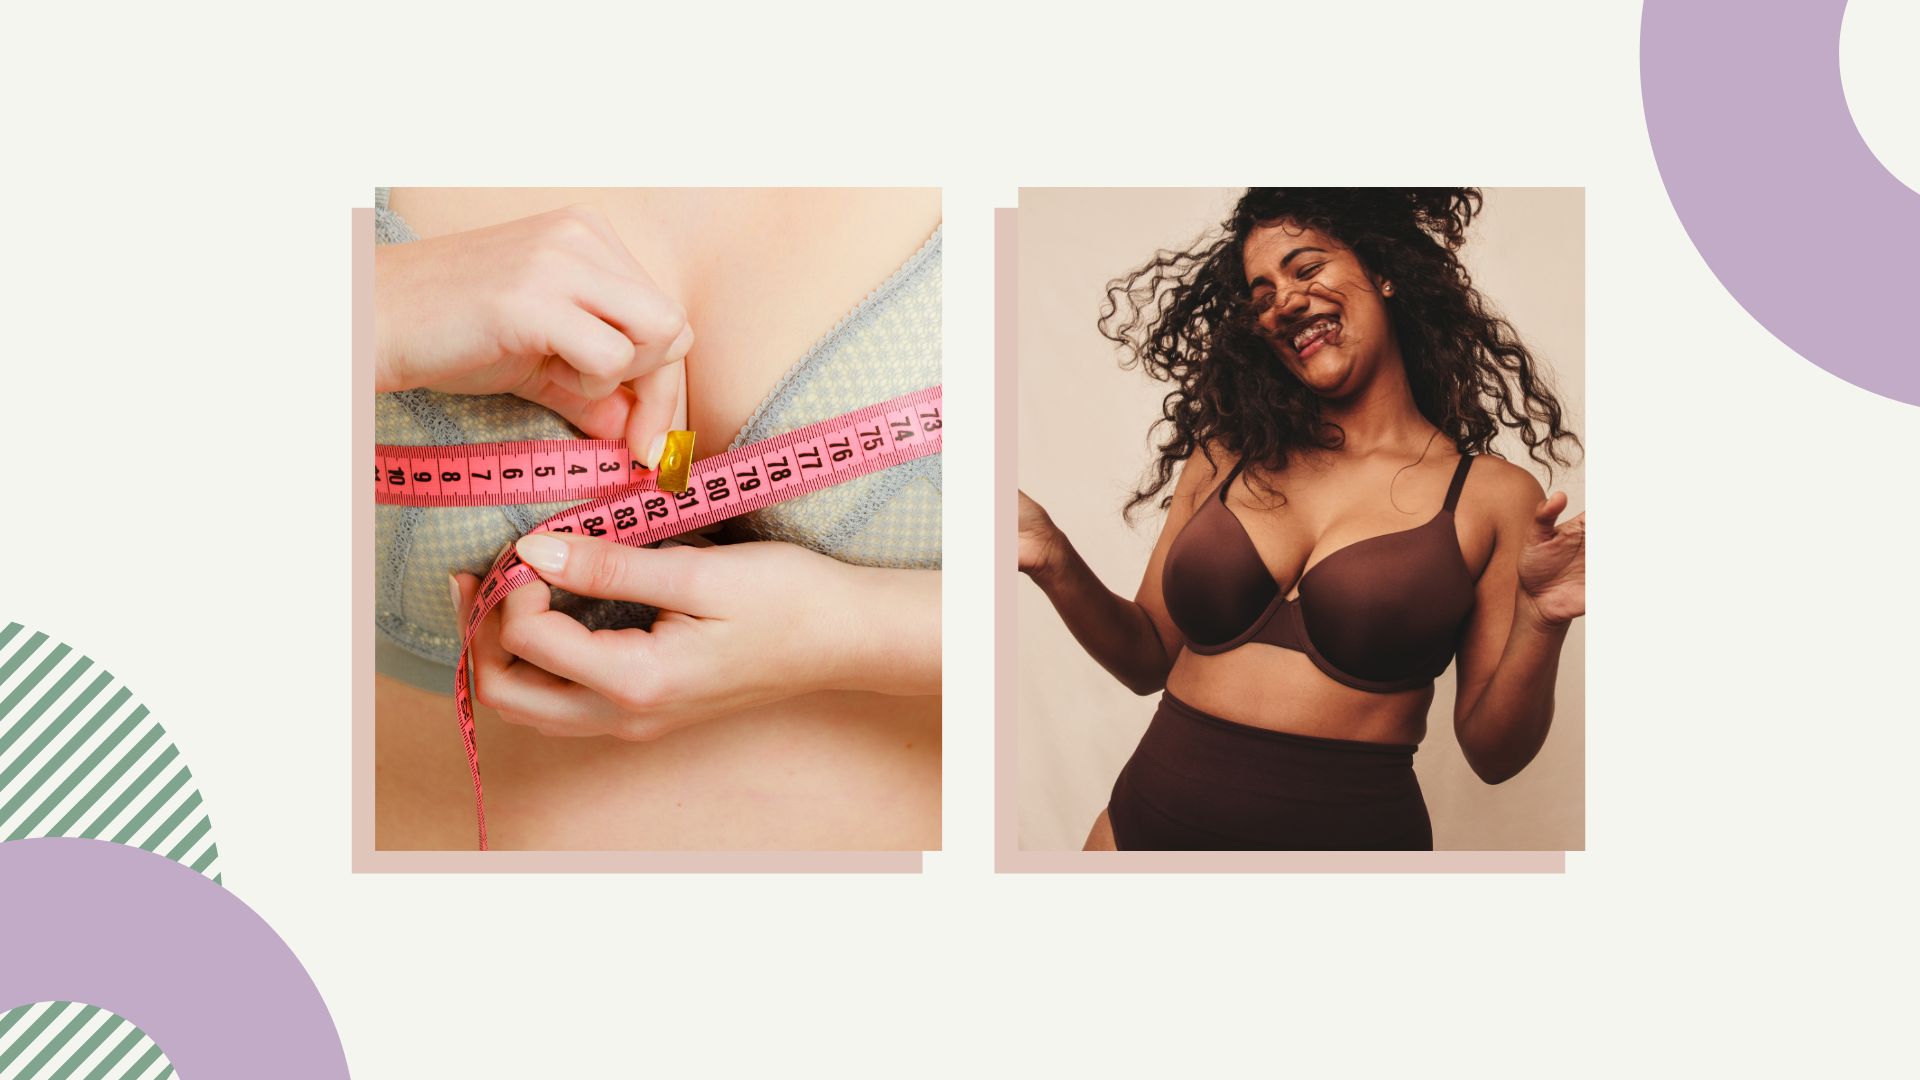 How to measure your bra size: according to experts